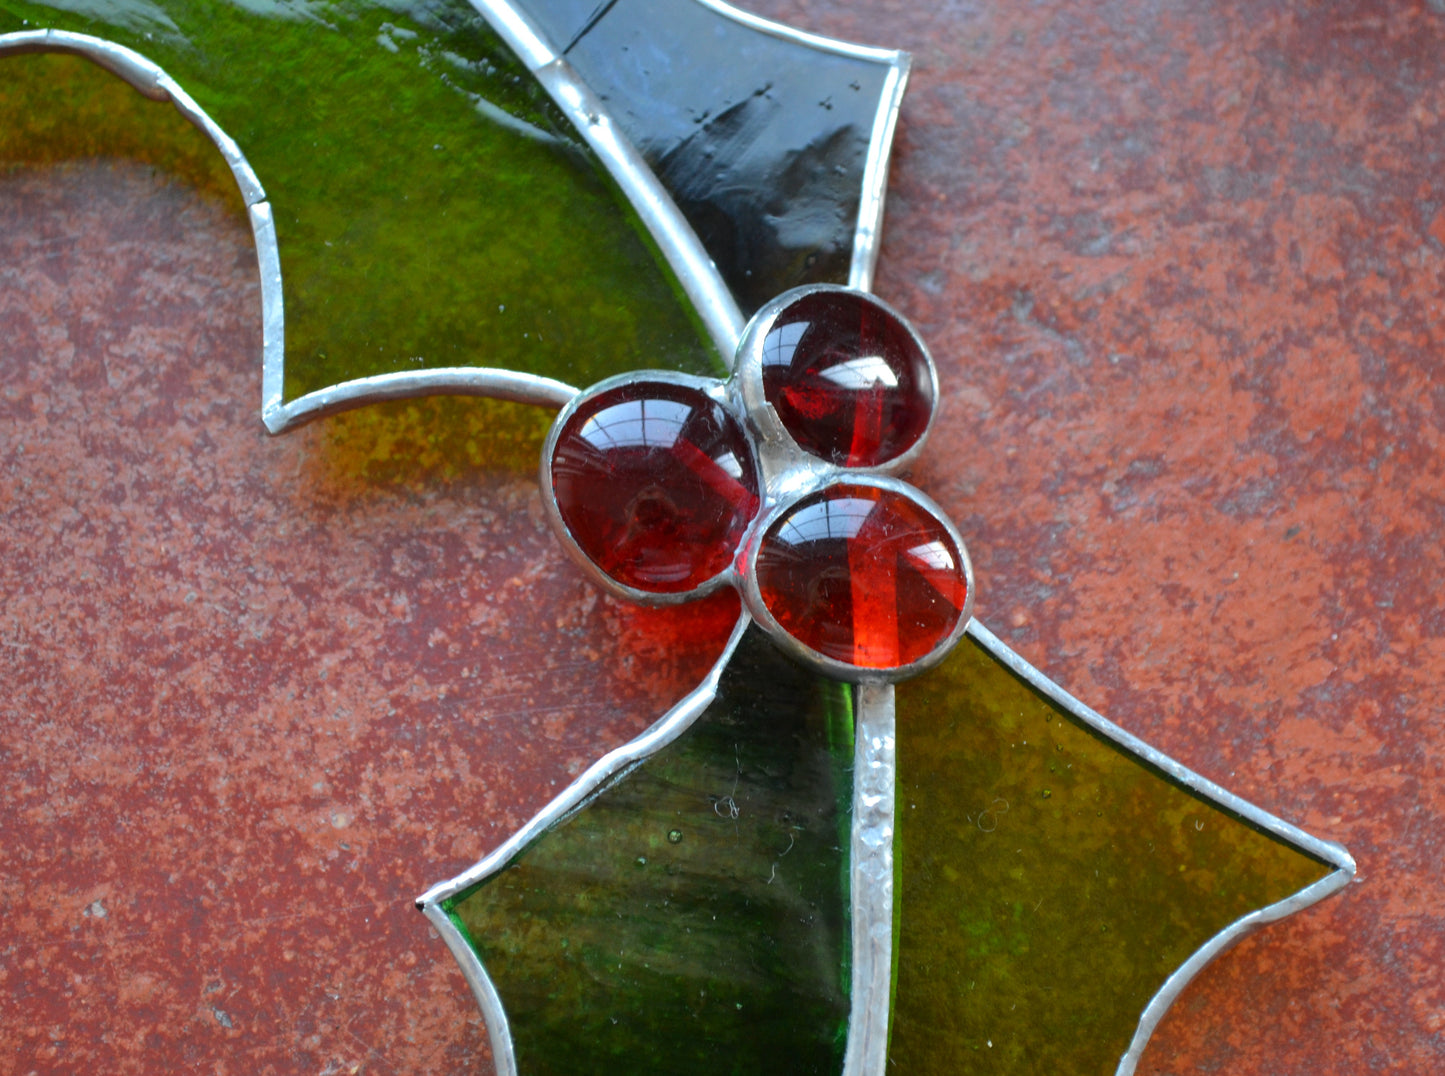 Stained glass holly wreaths